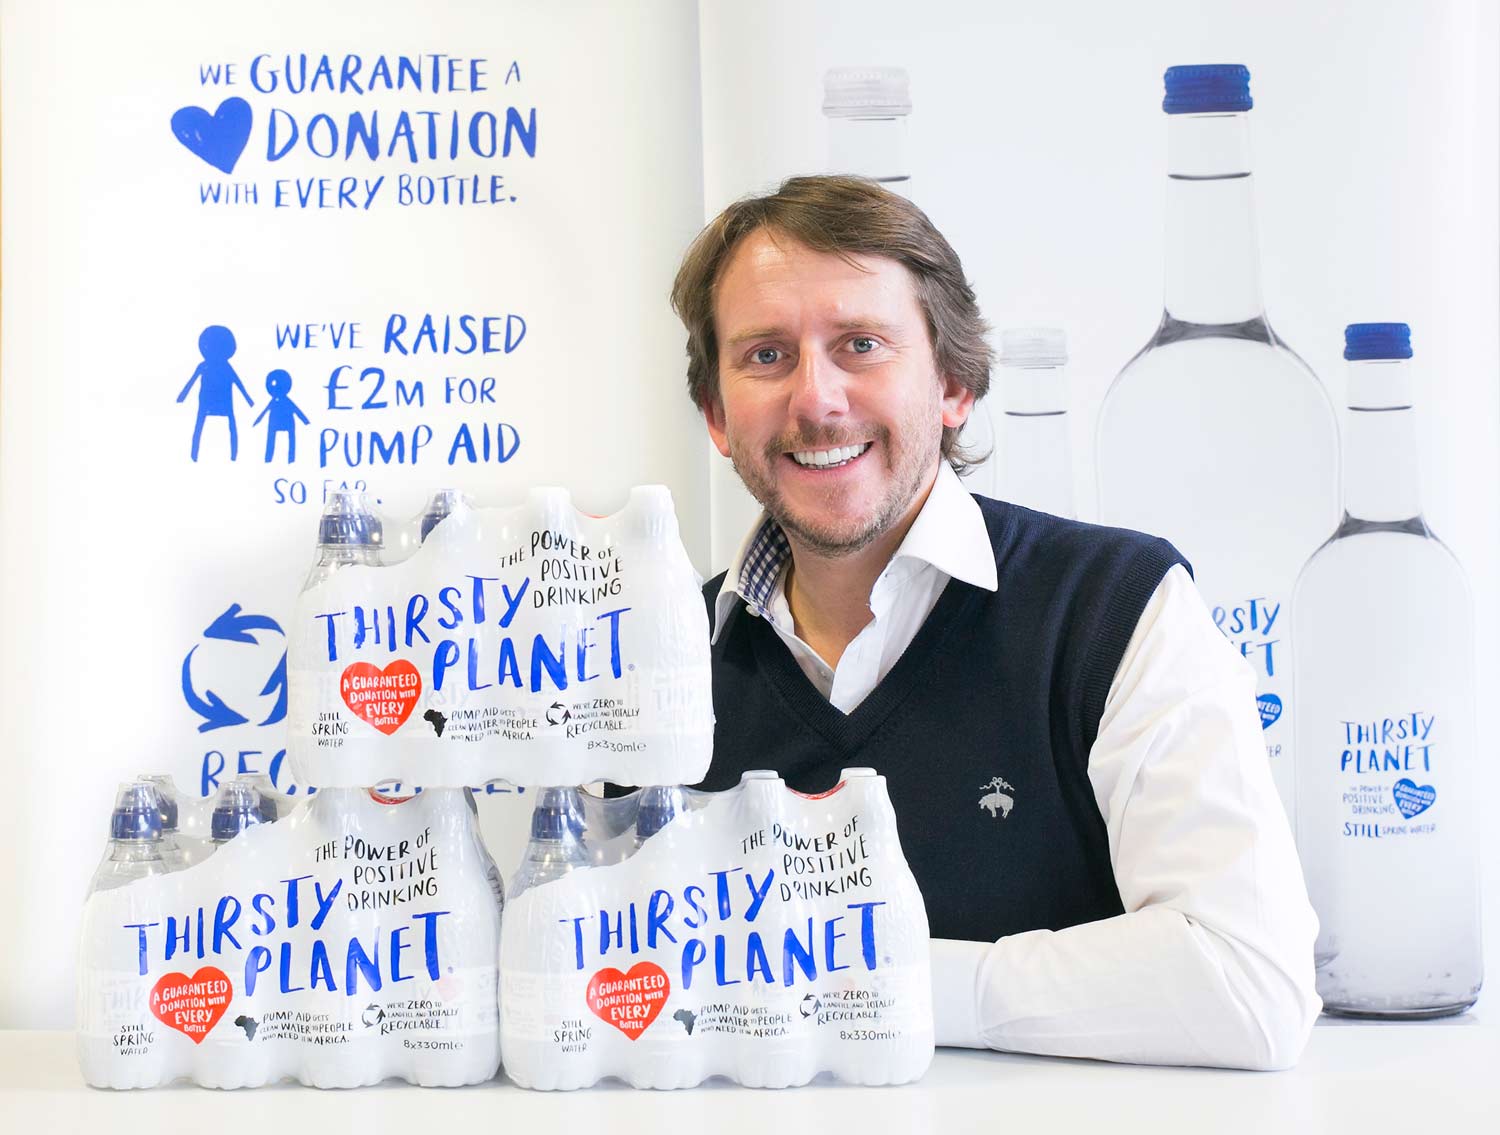 Managing director James Cain, who was made an OBE for his charitable work with Thirsty Planet